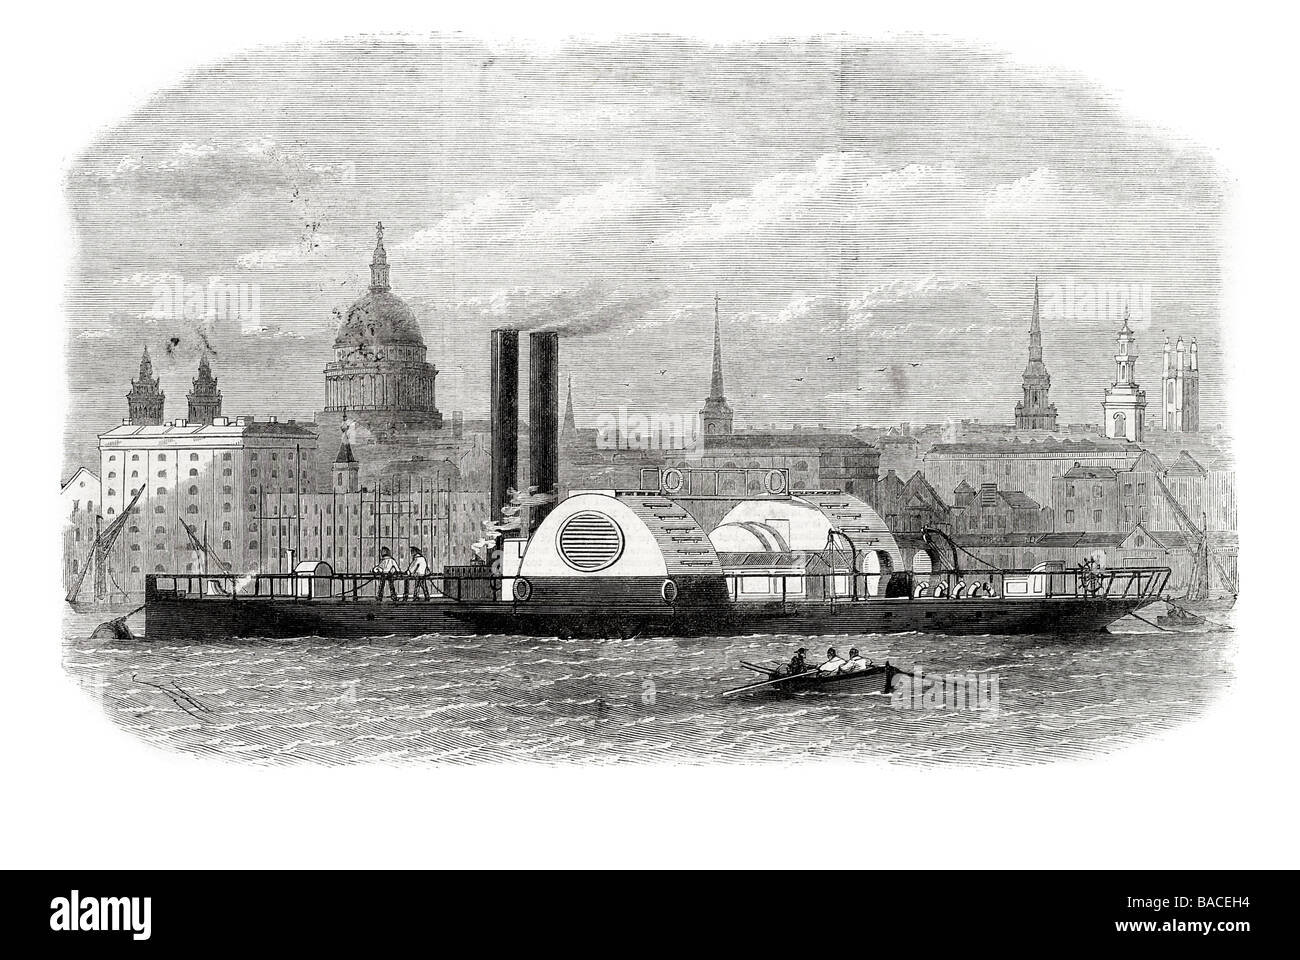 New Floating Fire Engine Fire in London Docks 1868 Stock Photo